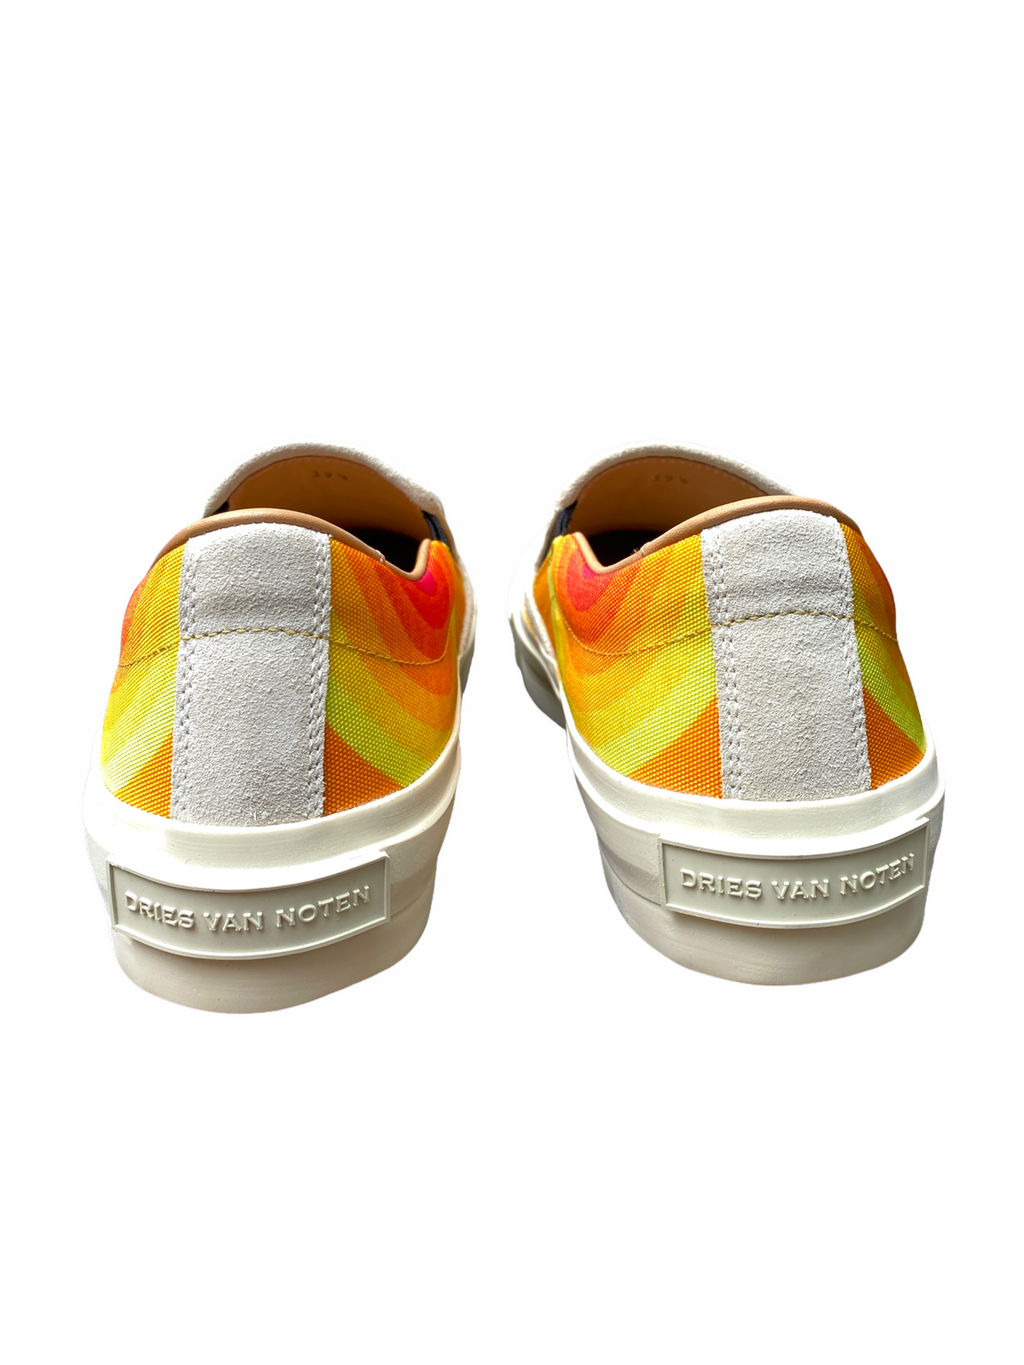 Iconic Waves patterns Yellow Slip Ons